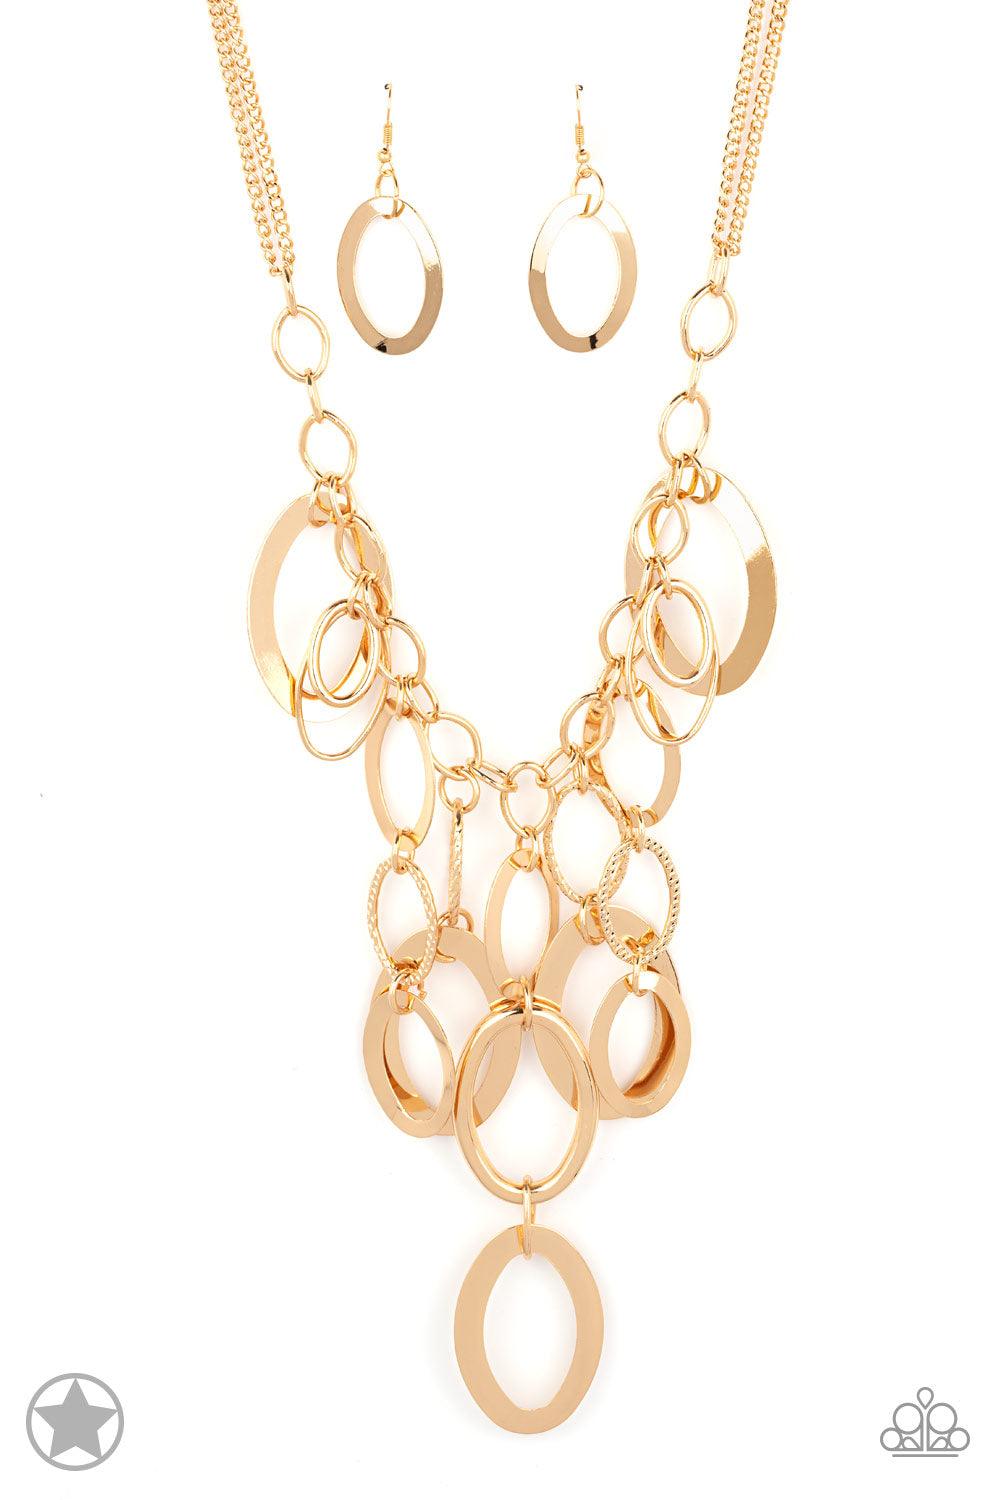 Paparazzi Accessories A Golden Spell - Gold Large gold links and shimmering textured gold rings cascade below a gold chain freely, allowing for movement that makes a bold statement. Features an adjustable clasp closure. Sold as one individual necklace. In